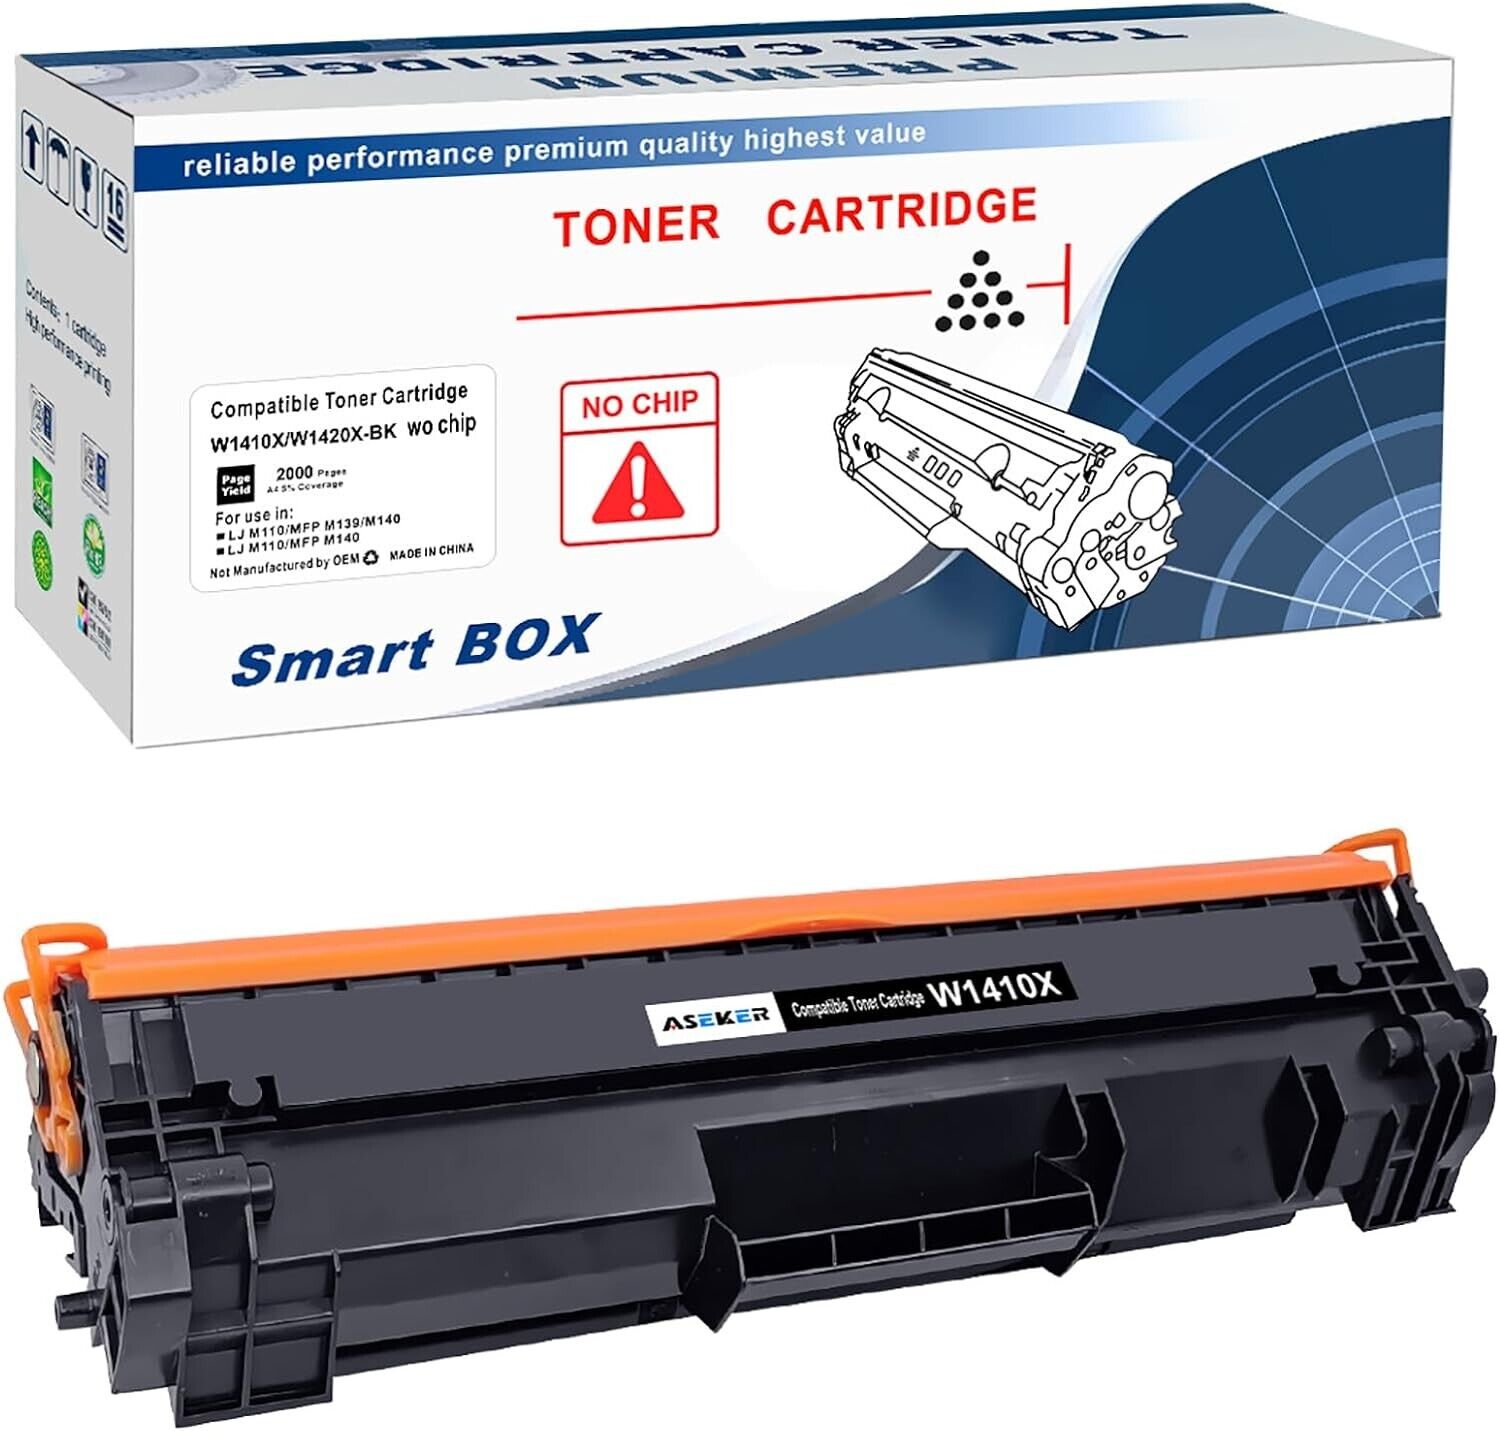 No Chip, with Tool ] 141X W1410X Compatible Toner Cartridge Black 2000 Pages 